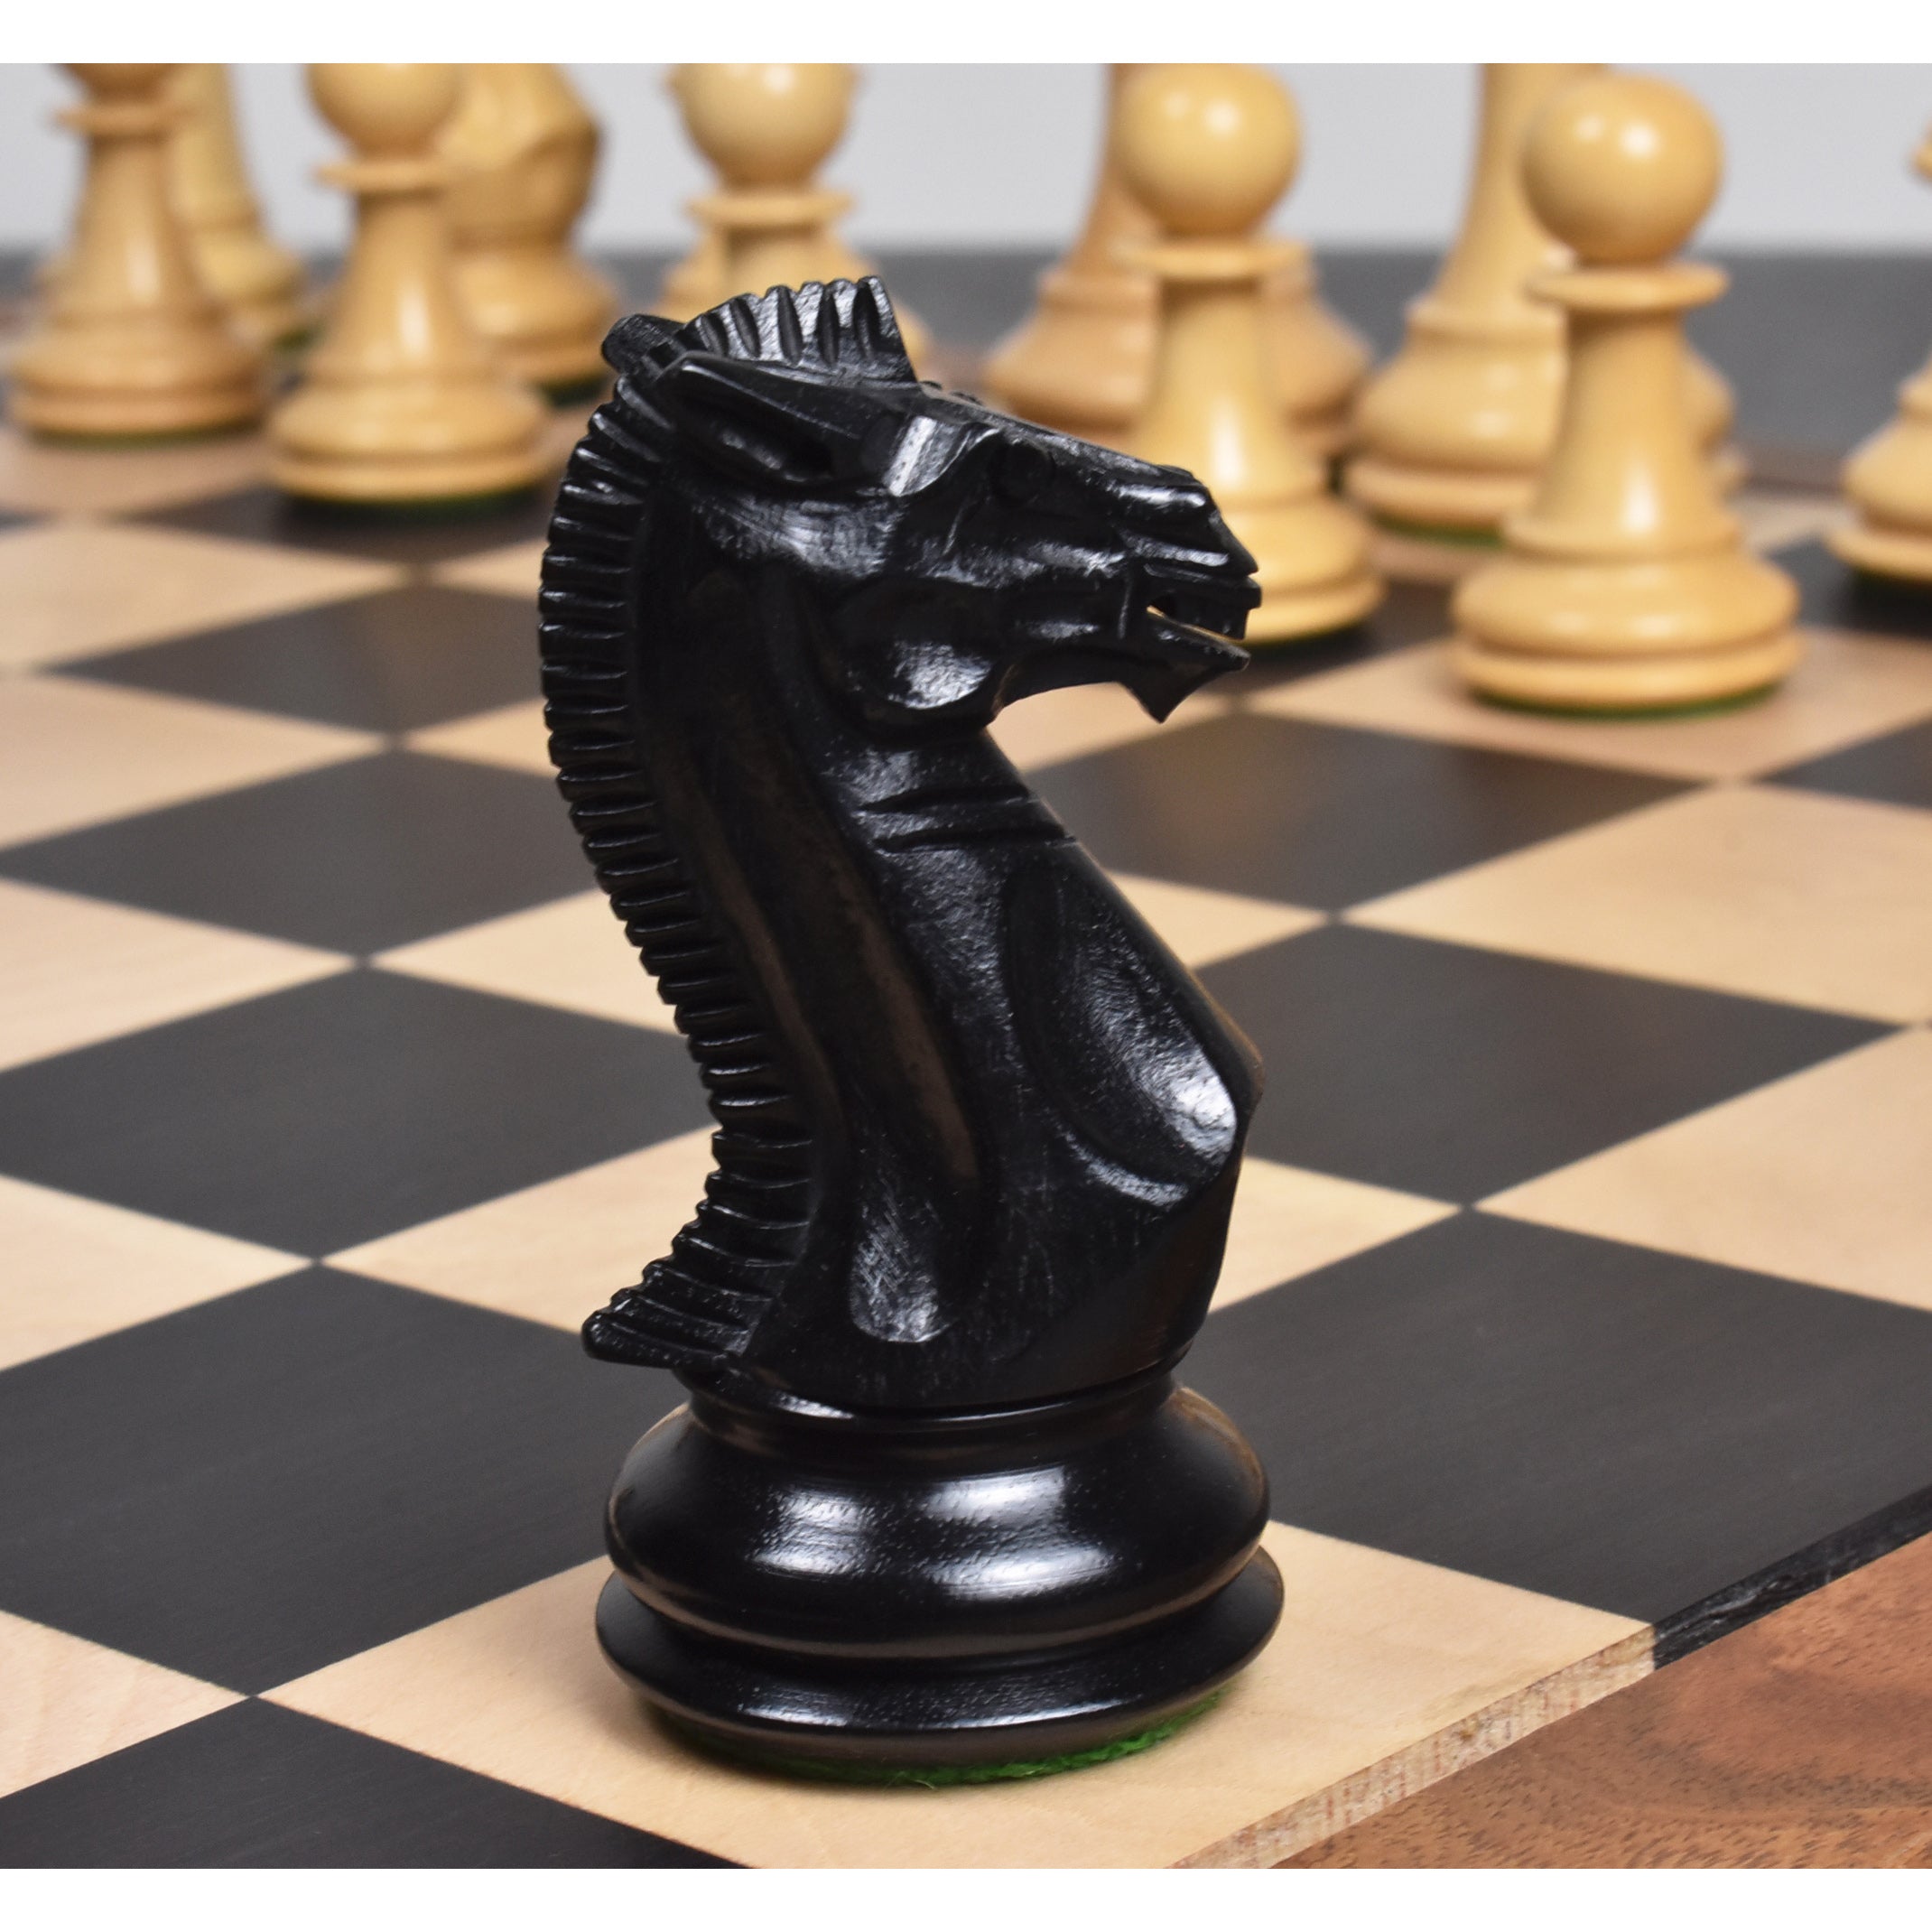 4.1" Traveller Staunton Luxury Chess Set- Chess Pieces Only-Triple Weighted Ebony Wood